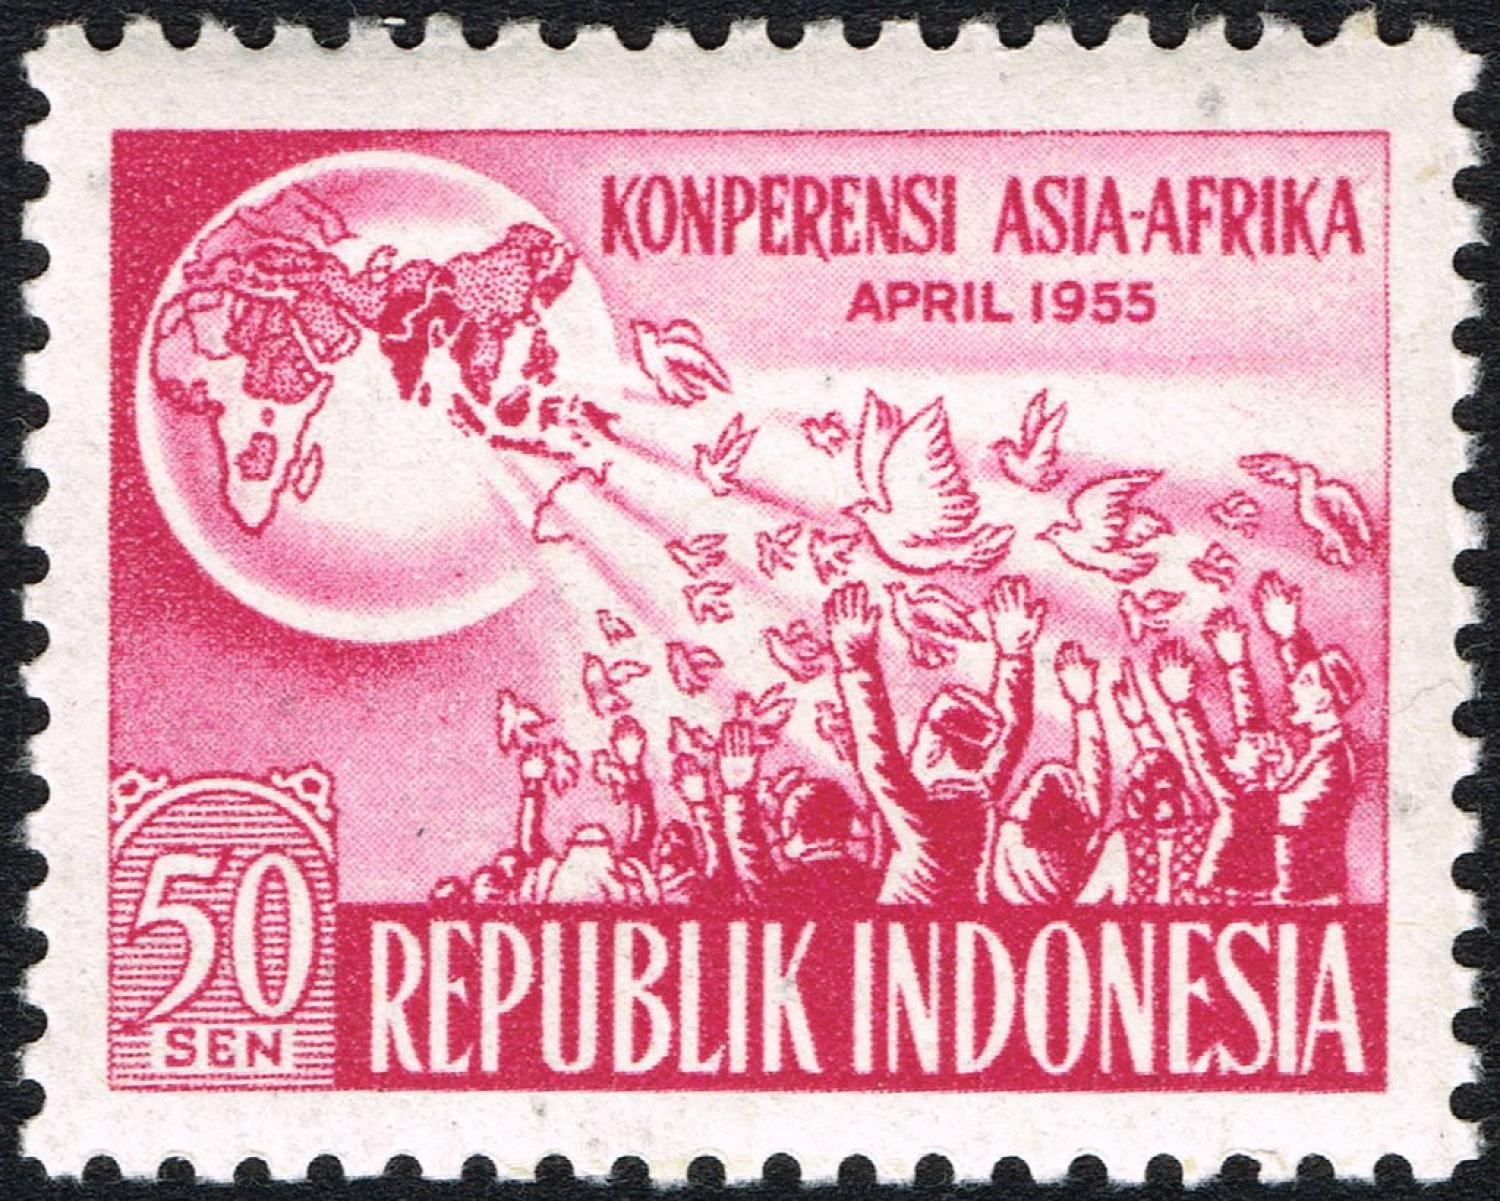 Commemorative postage stamp issued in Indonesia following the 1955 Bandung Conference (Wikimedia Commons)